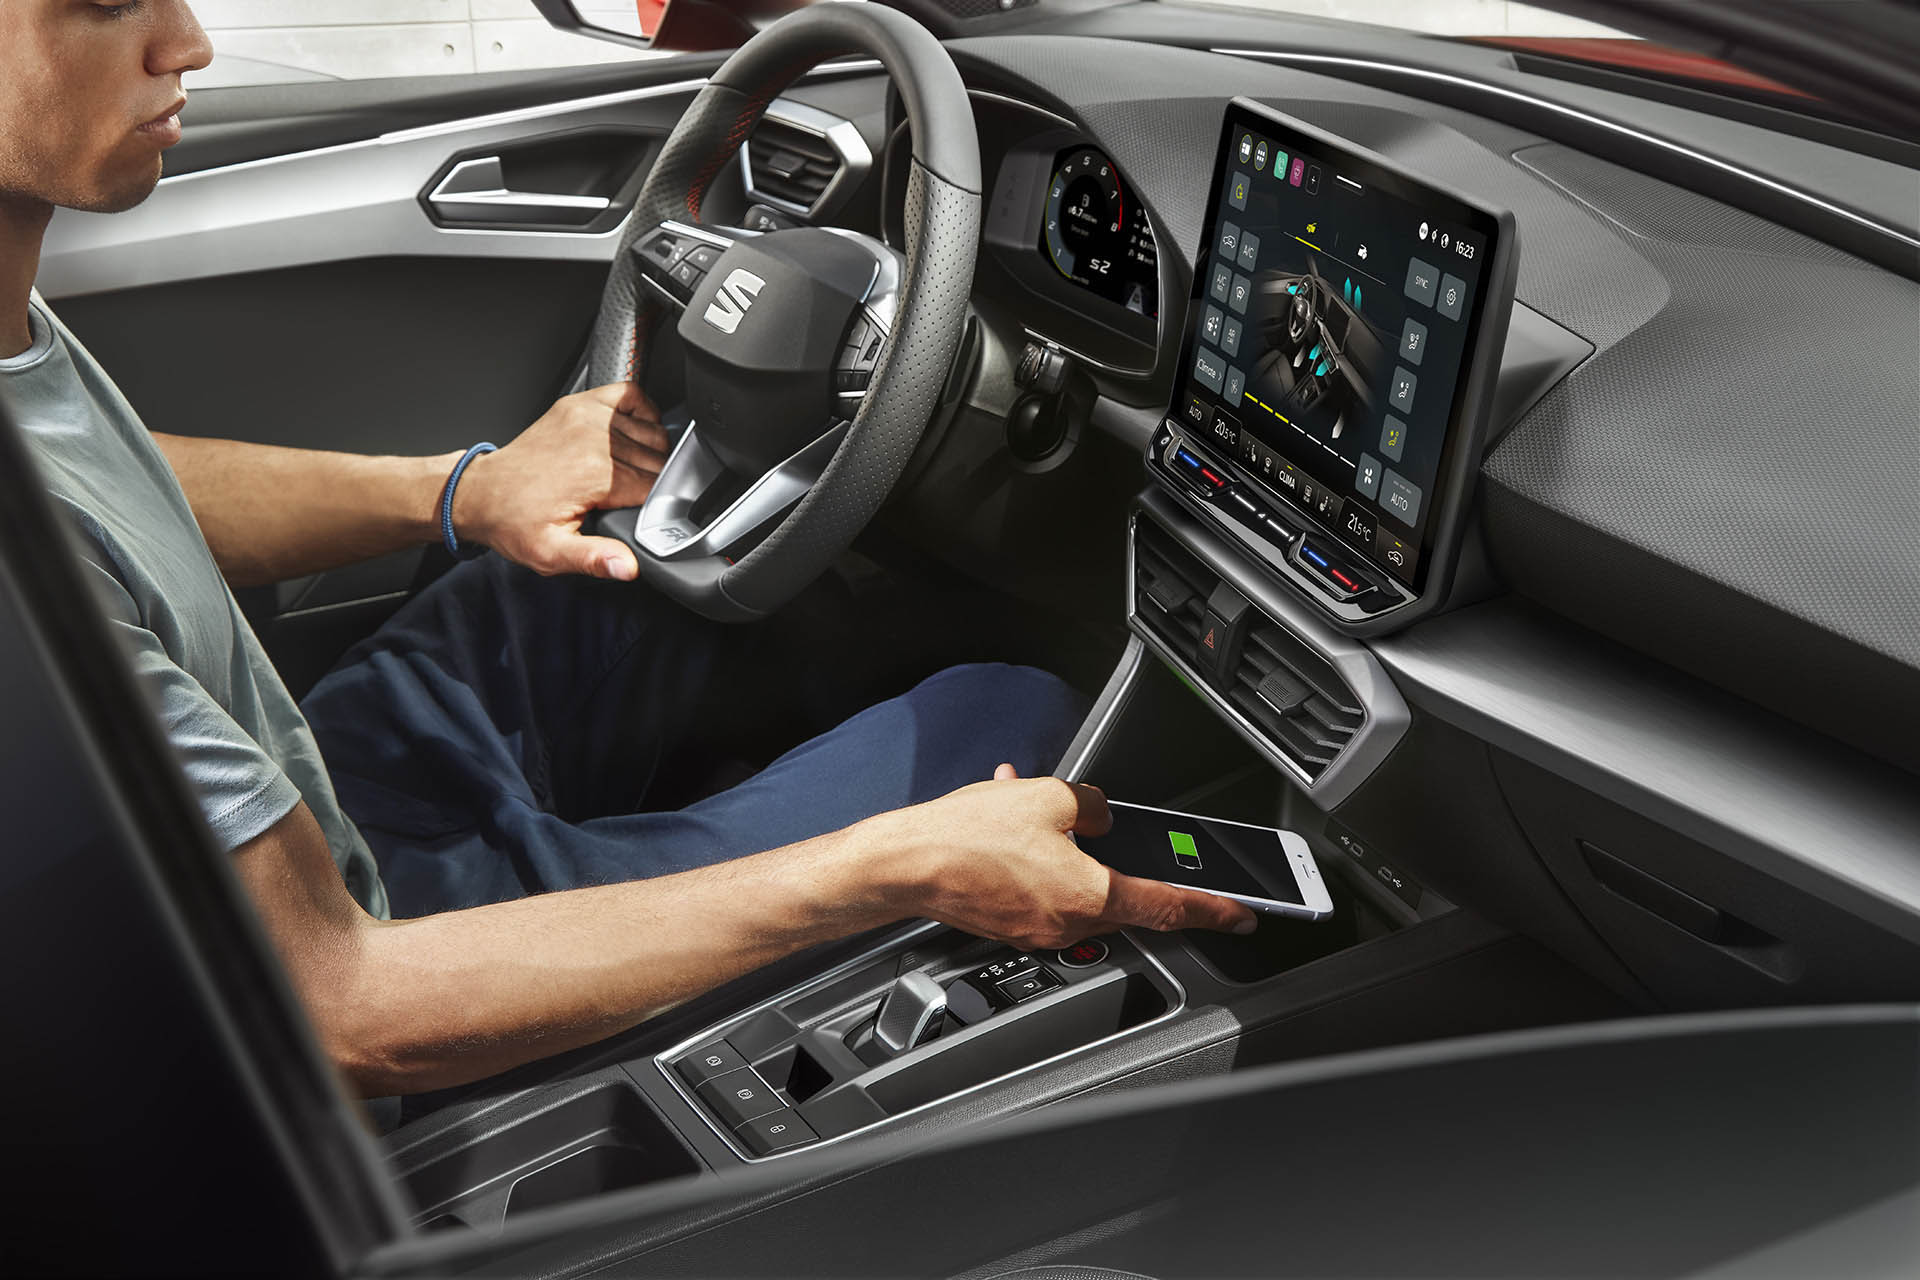 New-engines-and-improved-interior-for-the-upgraded-SEAT-Leon_02_HQa